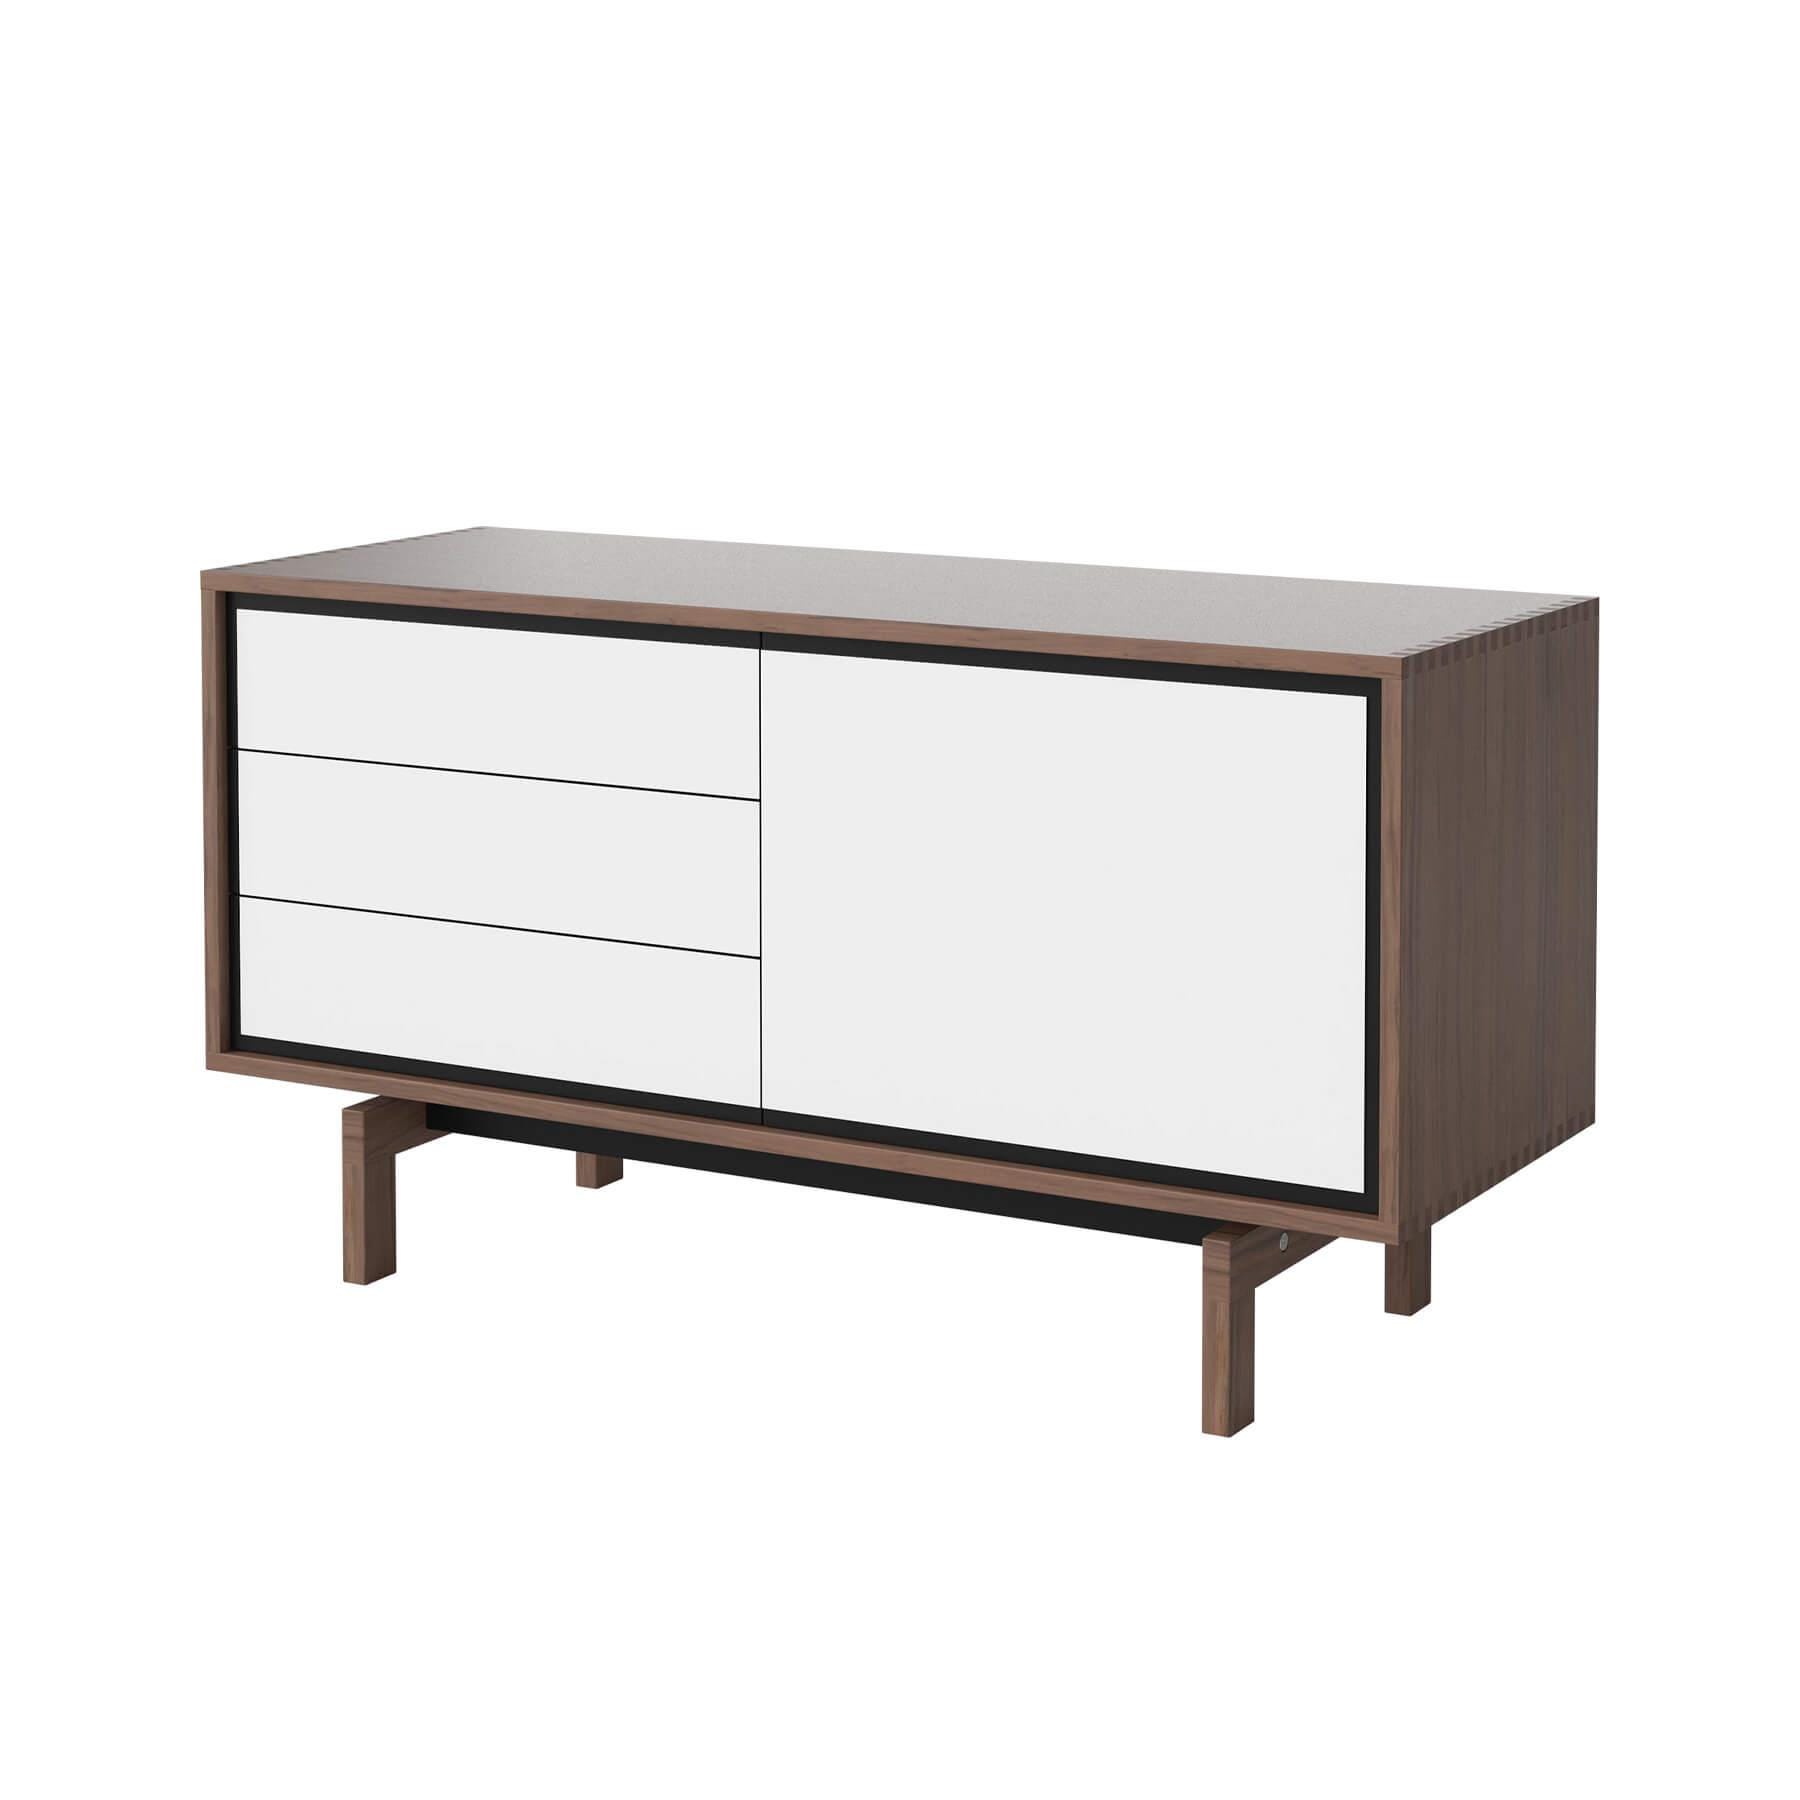 Bolia Floow Sideboard Small Oiled Walnut With White Laminate Dark Wood Designer Furniture From Holloways Of Ludlow